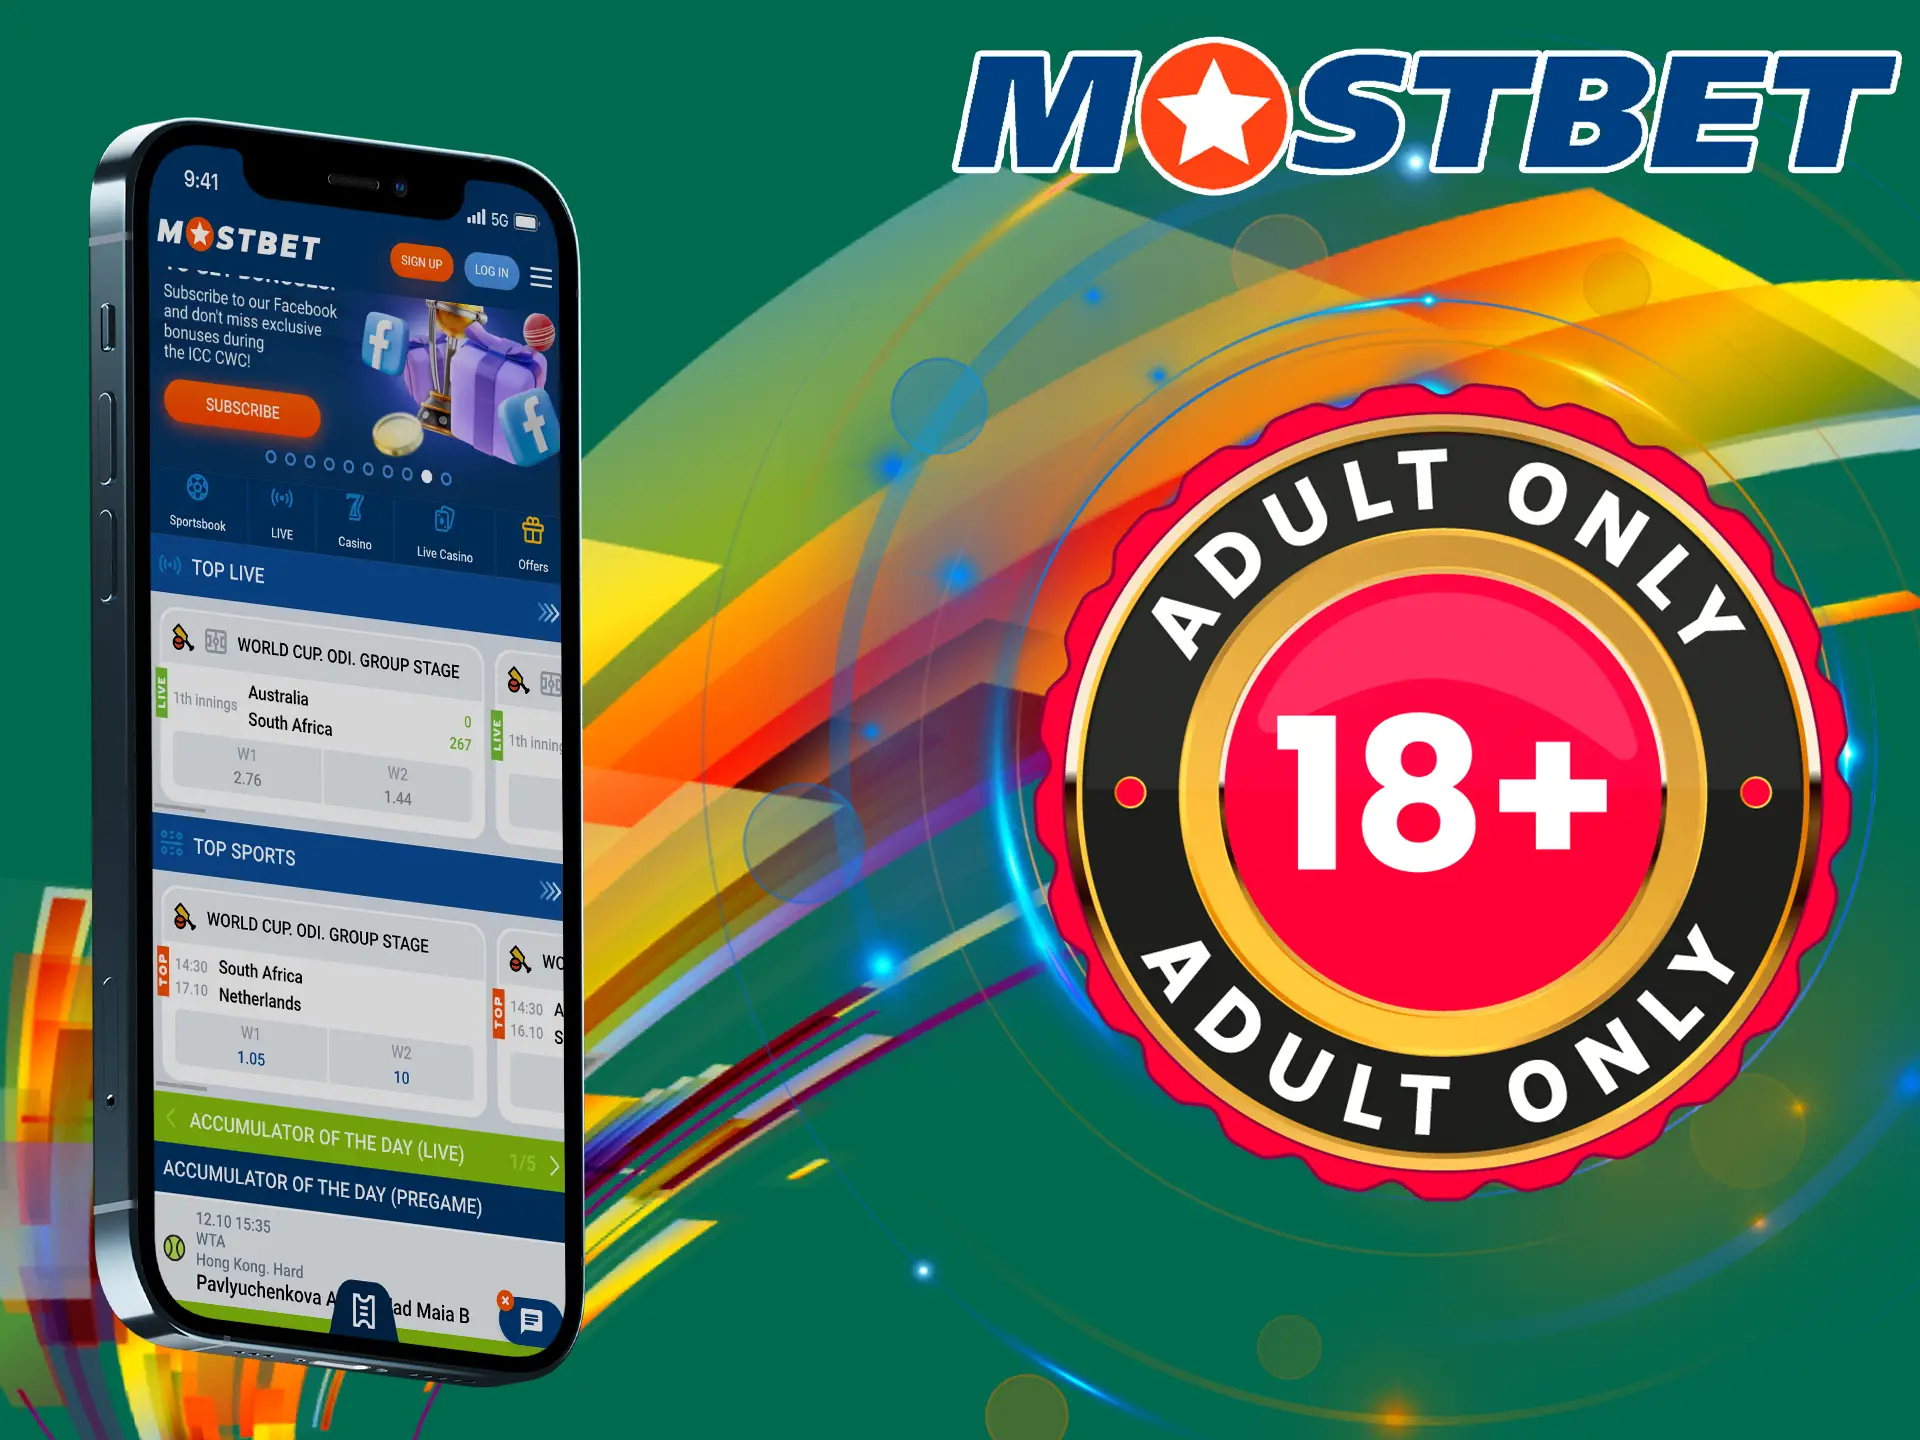 Mostbet urges players to gamble responsibly, avoid uncontrolled spending, and restrict access to the platform to under 18s.